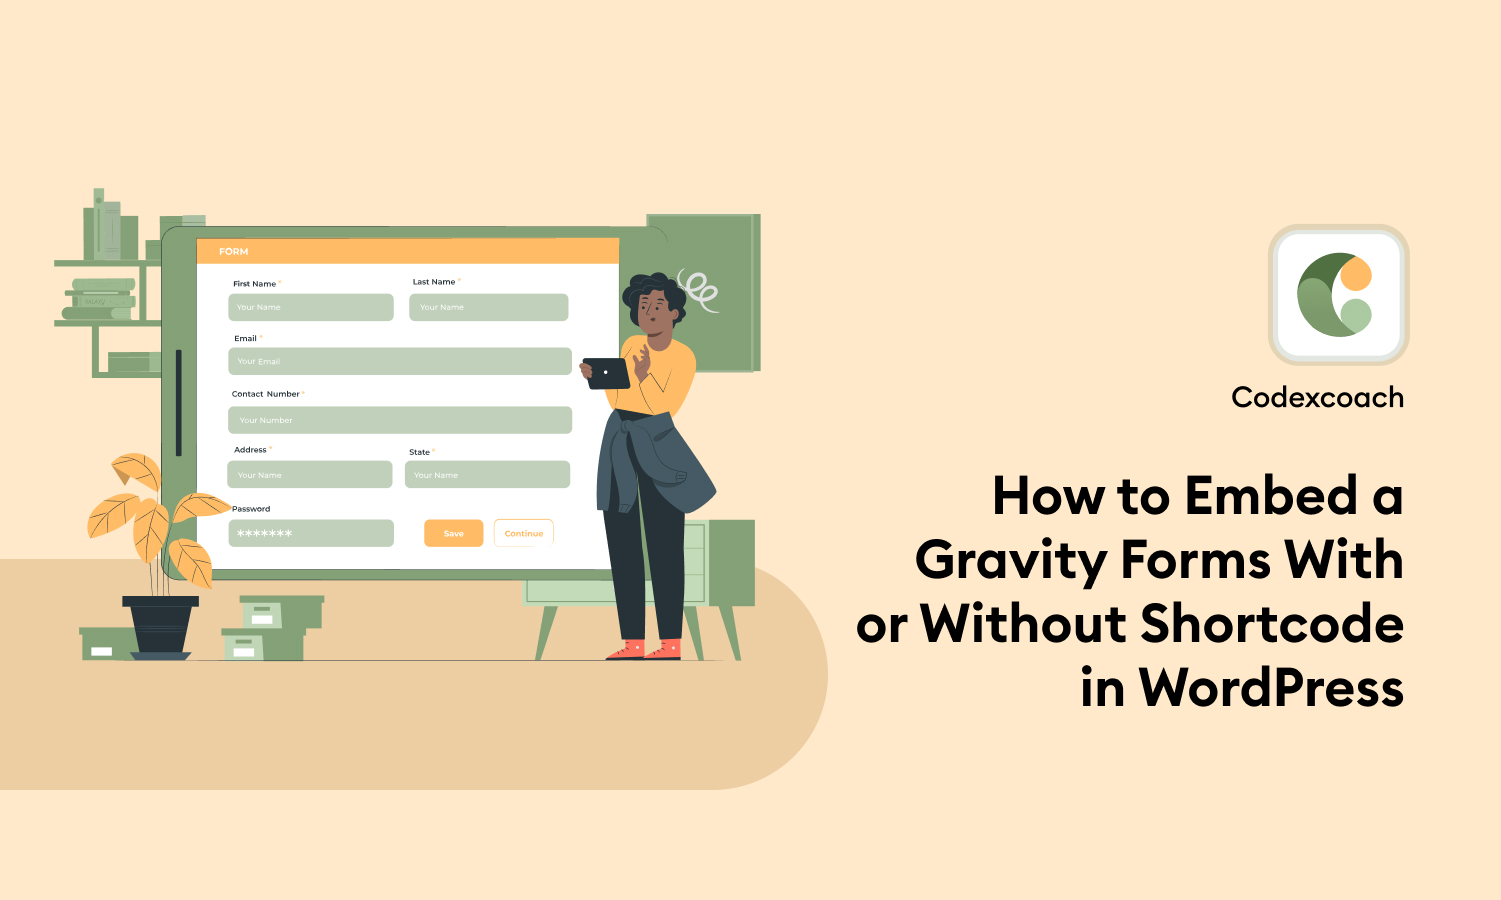 How to Embed a Gravity Forms With or Without Shortcode in WordPress